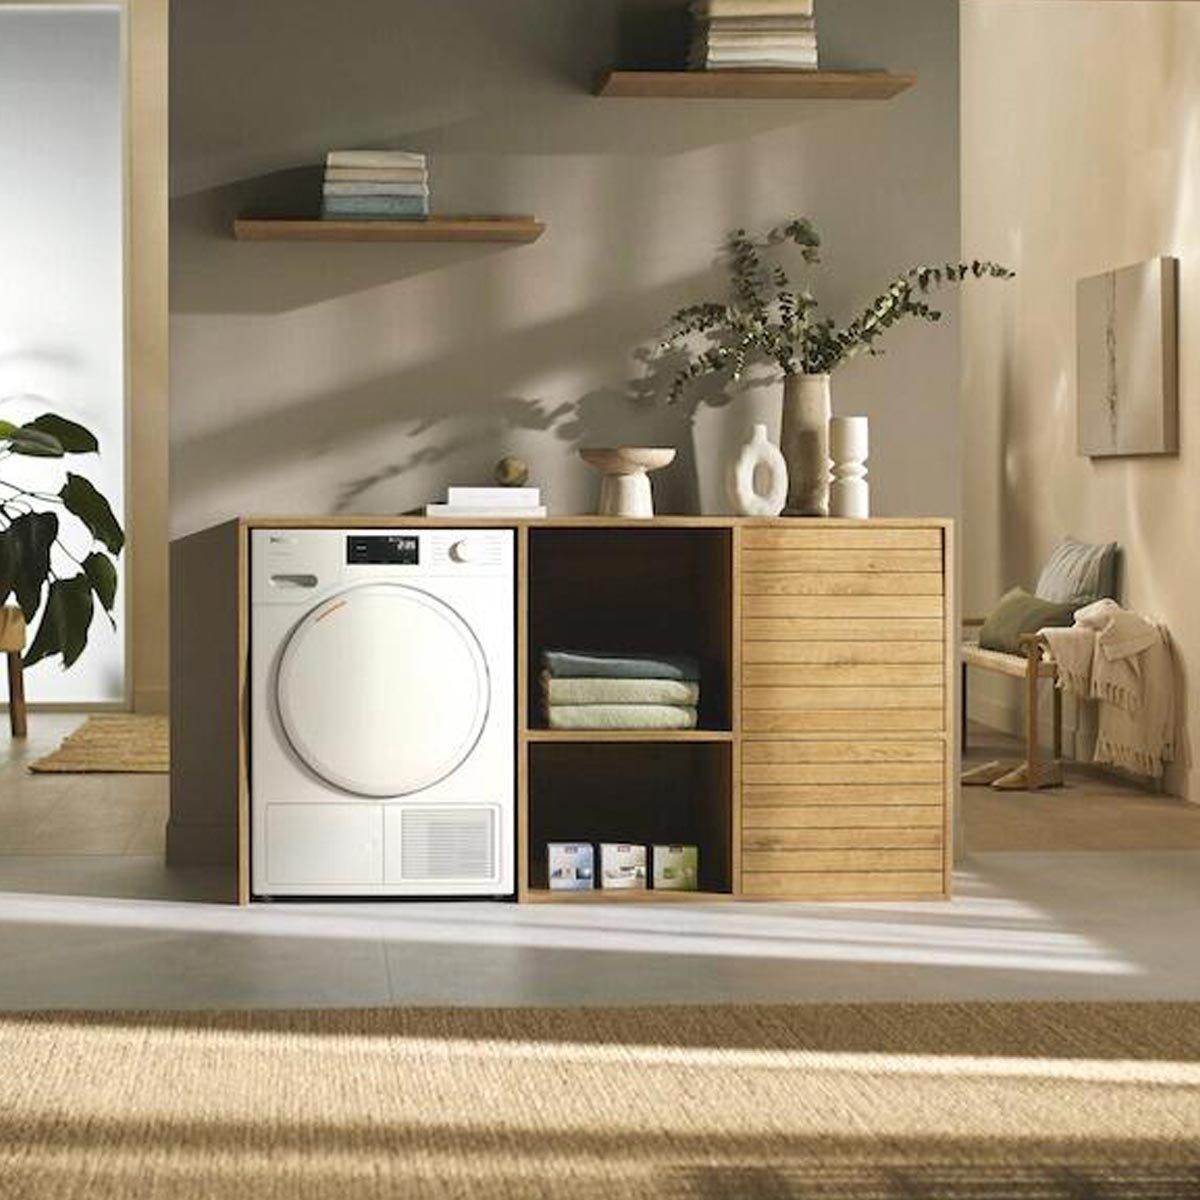 https://www.familyhandyman.com/wp-content/uploads/2023/03/8-Best-Washer-and-Dryers-for-an-Apartment-in-2023_Miele-Smart-Compact-Front-Load-Dryer_ecomm_via_appliancesconnection.com_FT.jpg